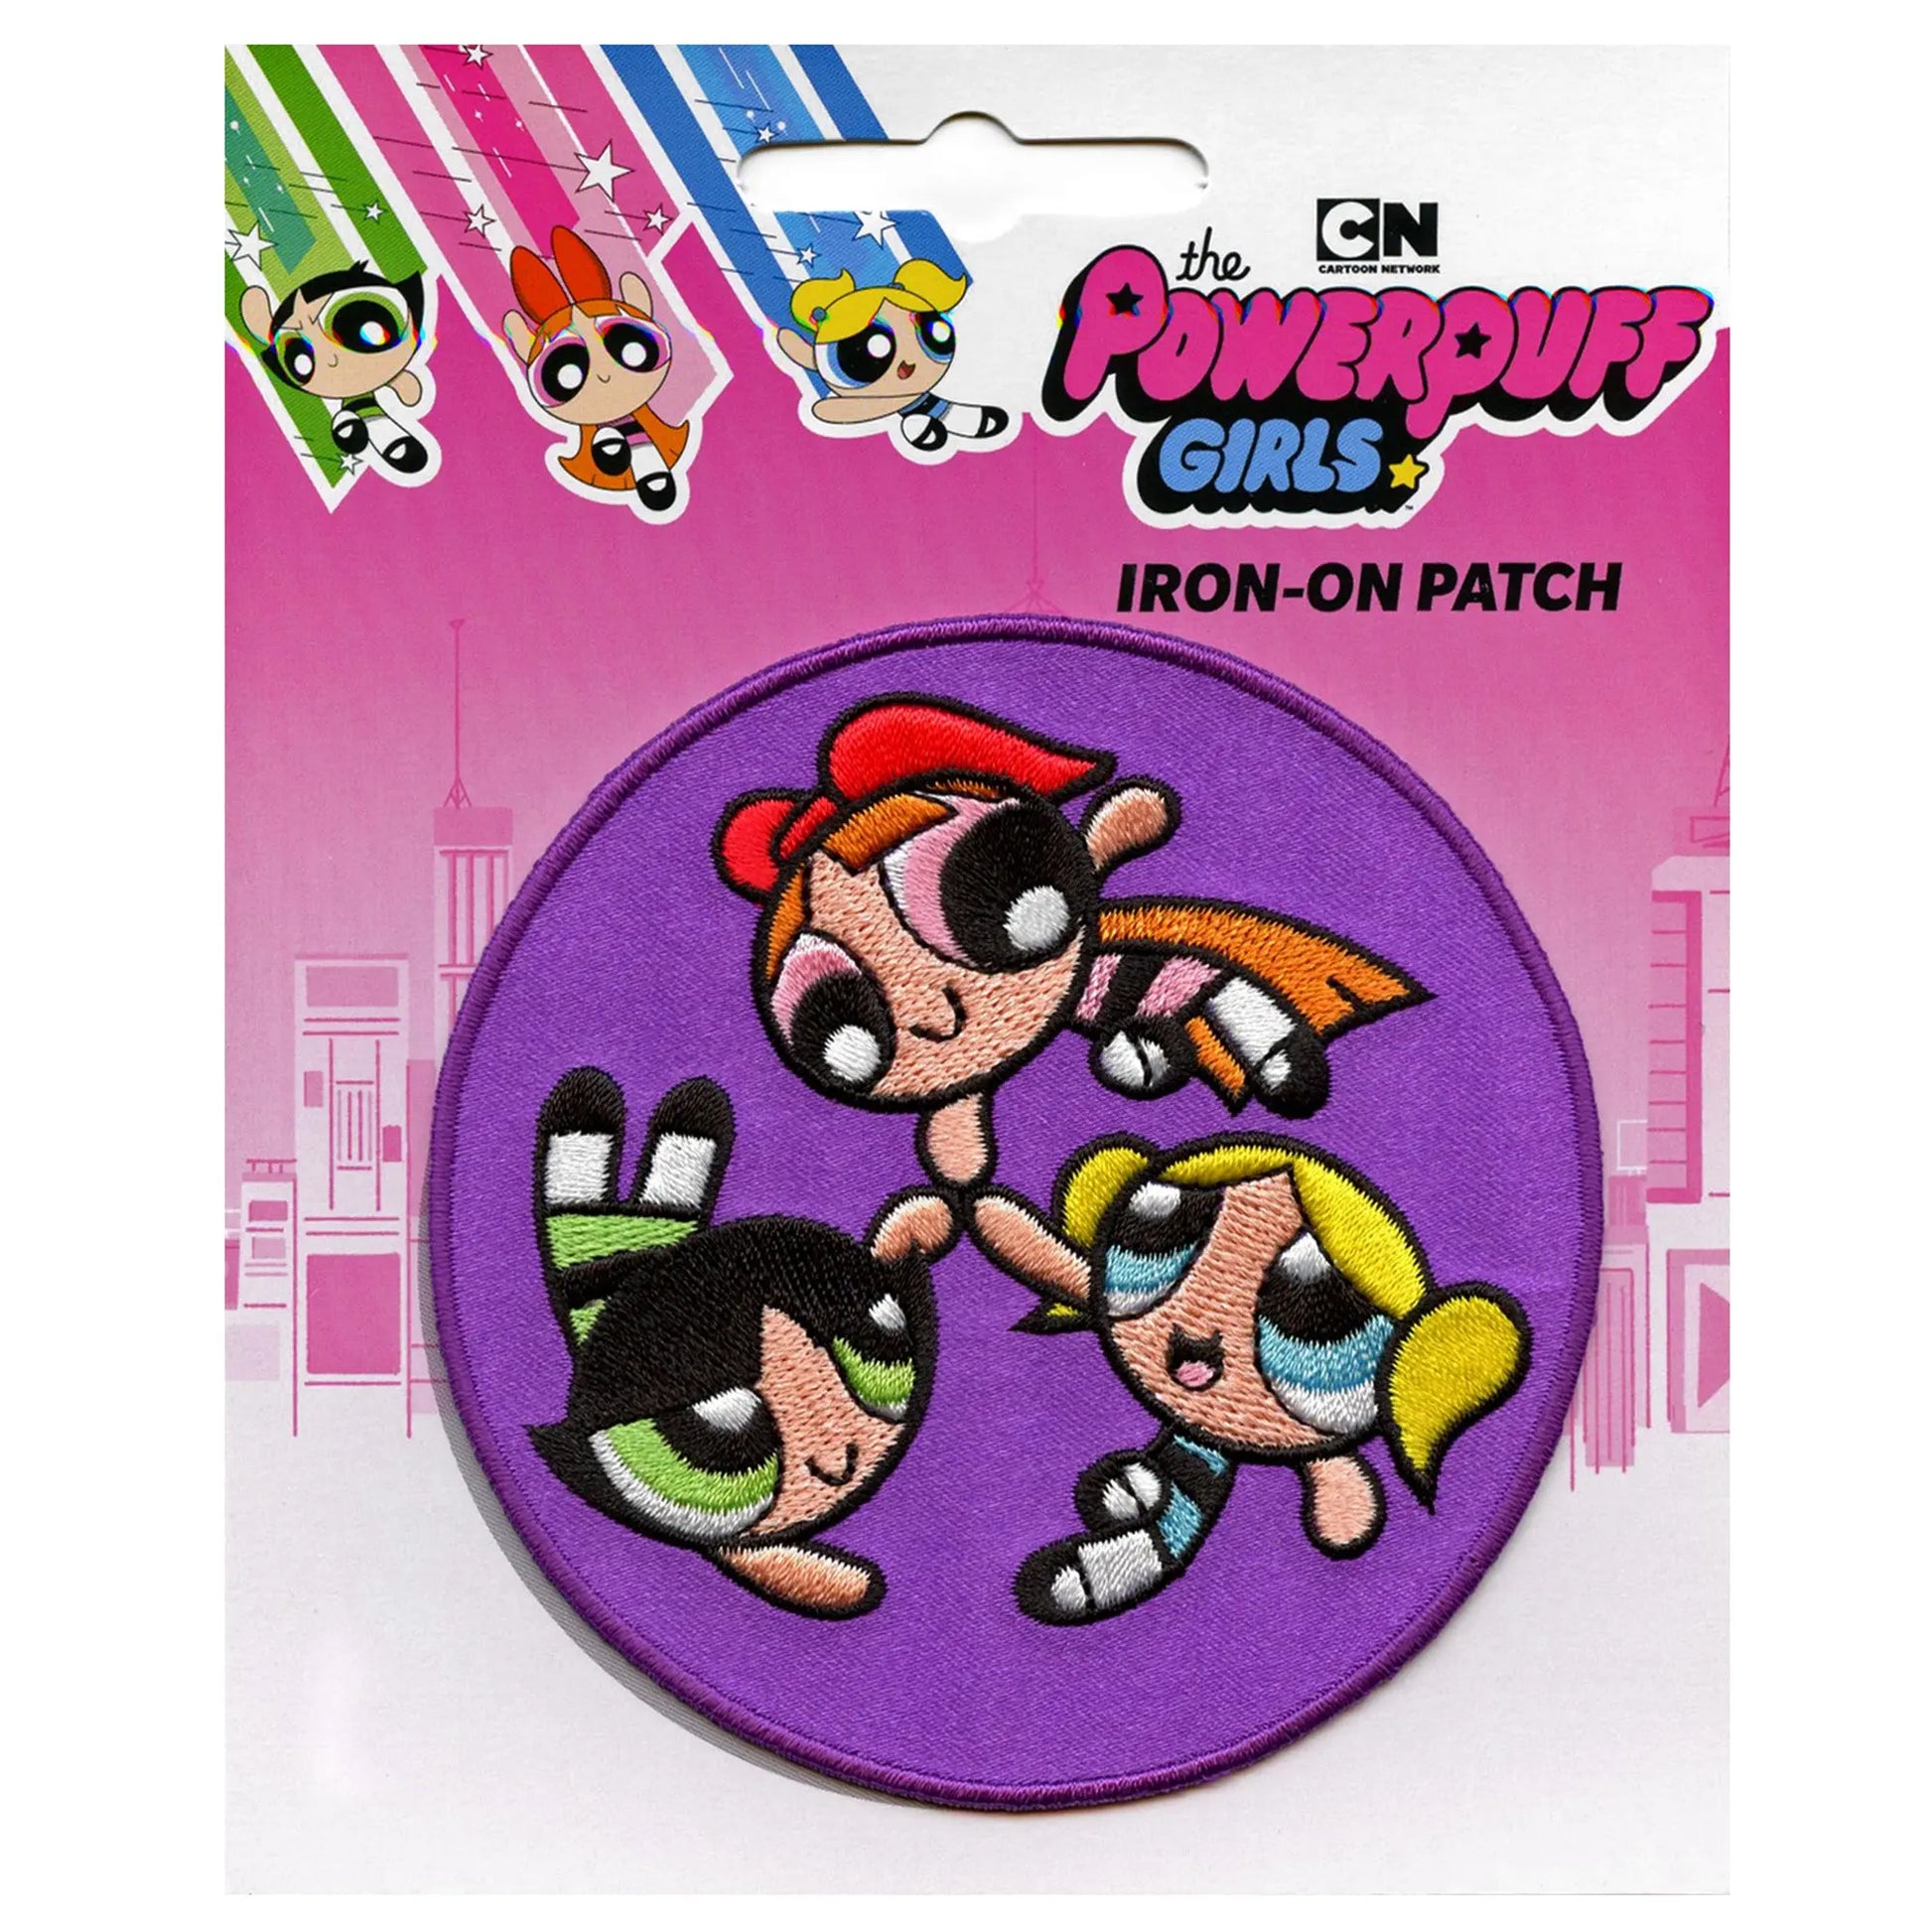 Powerpuff Girls Flying High Five Patch Cartoon Network Animation Embroidered Iron On